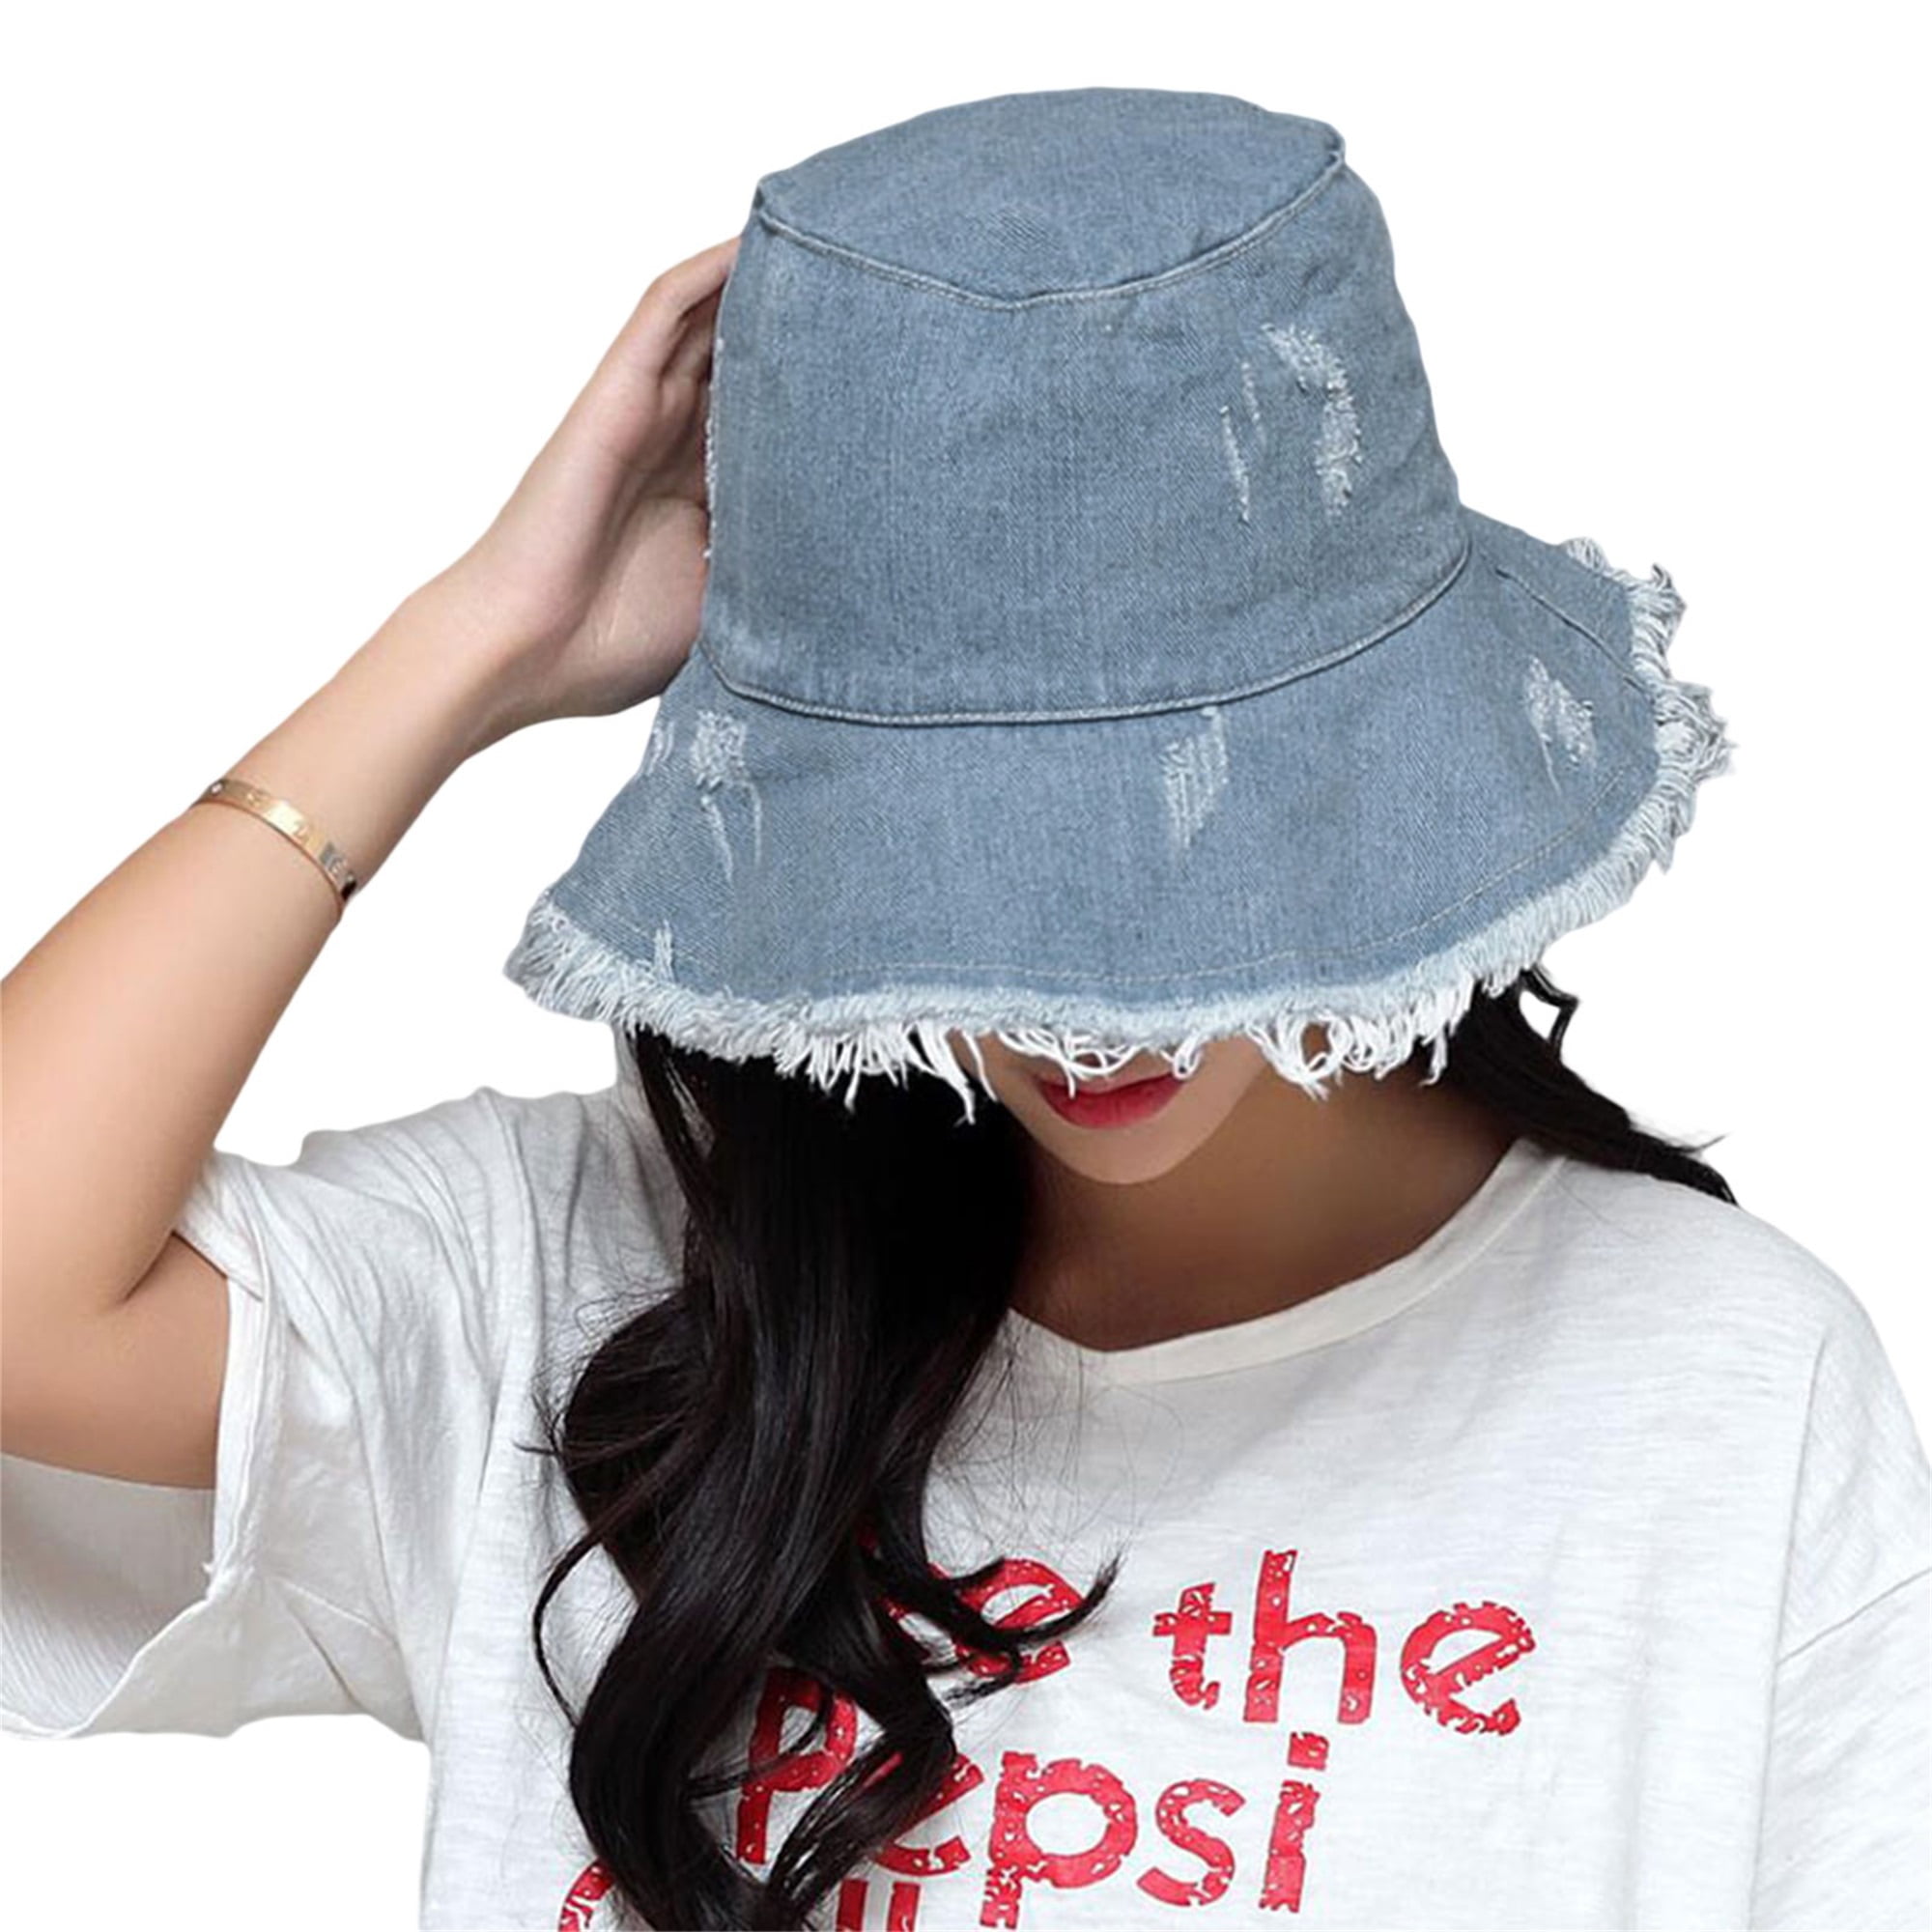 Products :: Cute Bucket Hat for Women and Teens. Fresh Look of Denim and  Linen Patchwork with Flowers, Unique Feminine Prep Fashion, Handmade Size  Large